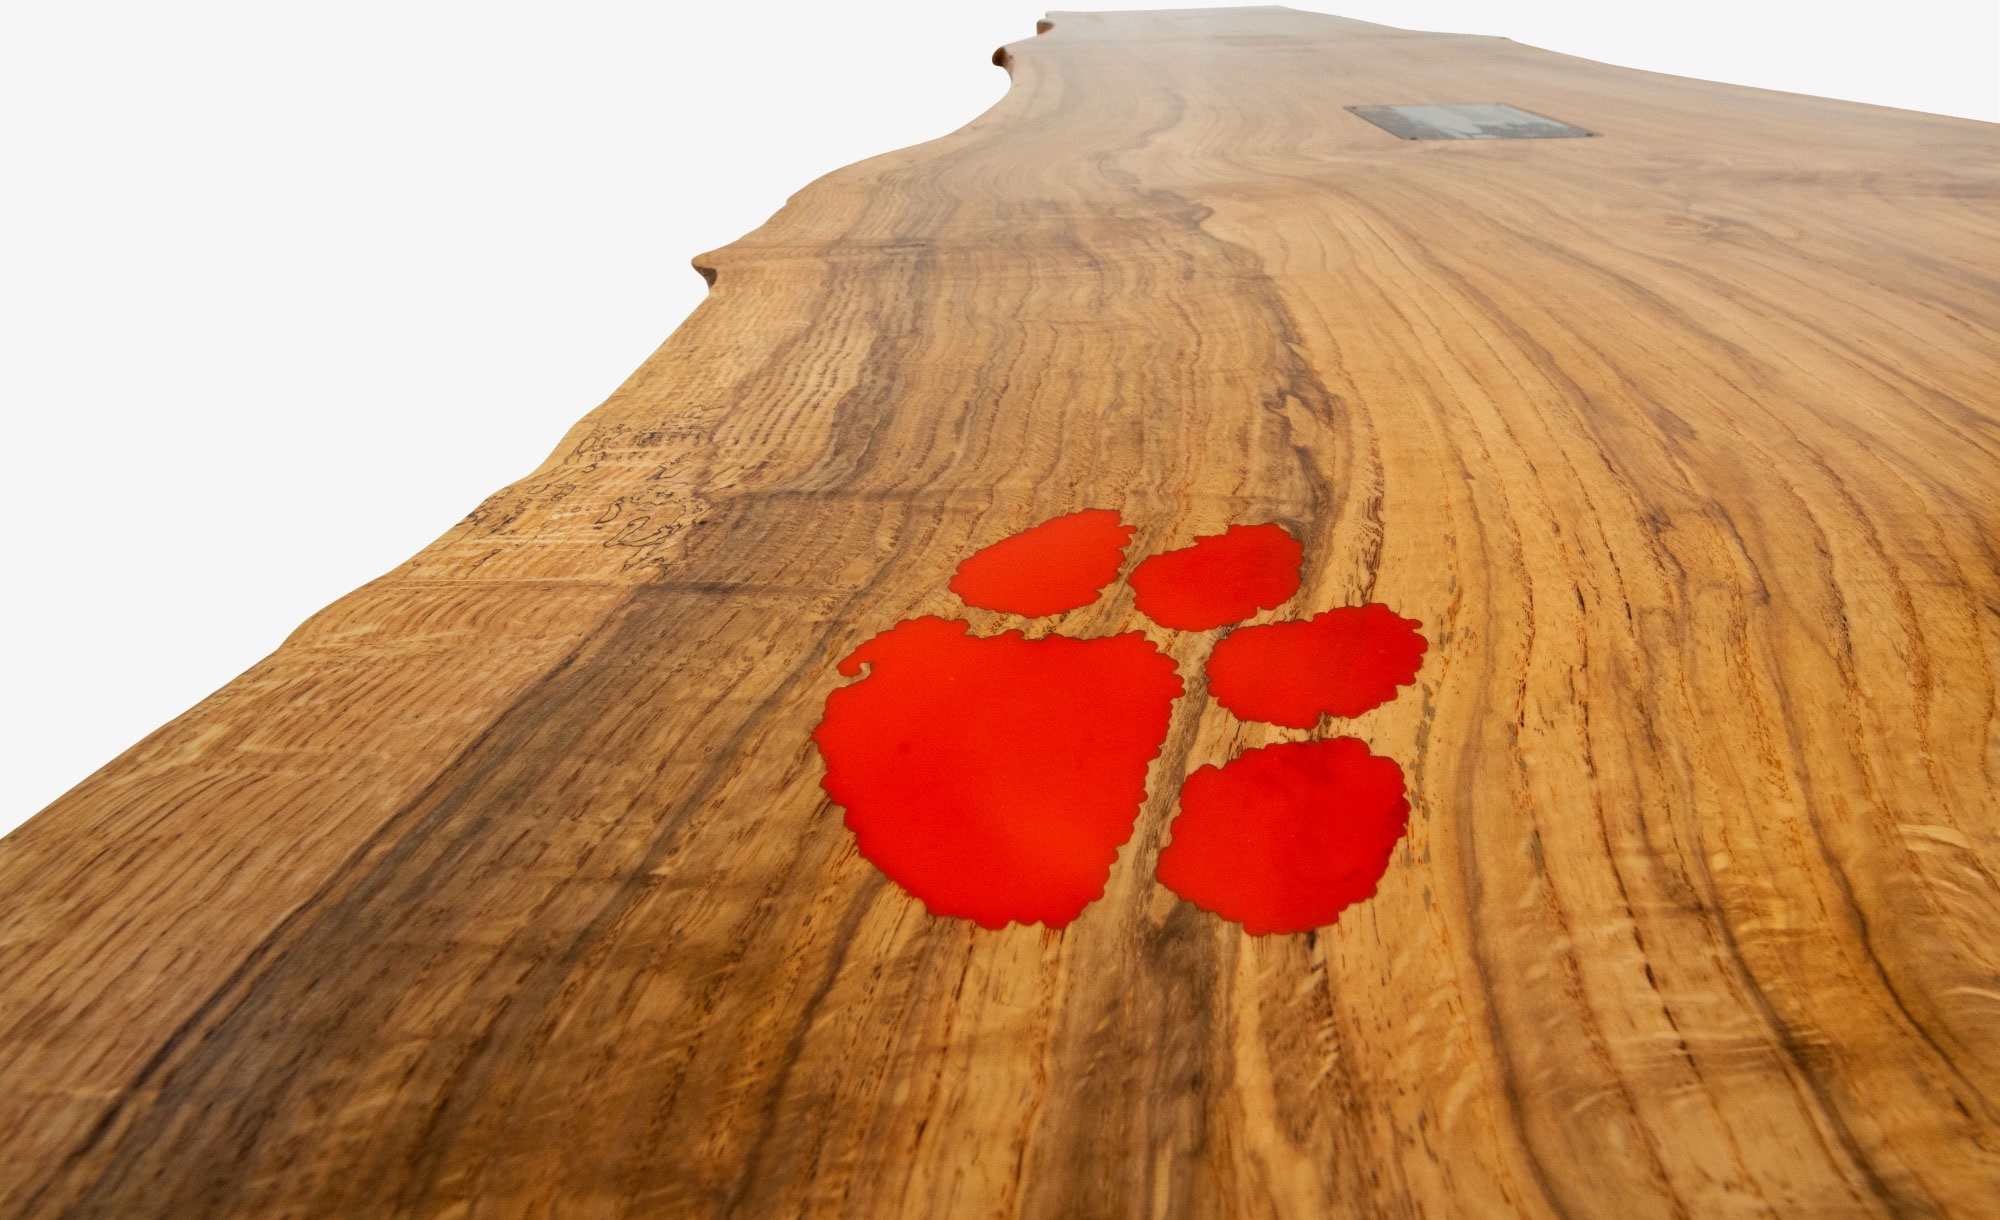 Up-close view of tabletop with tiger paw inlay